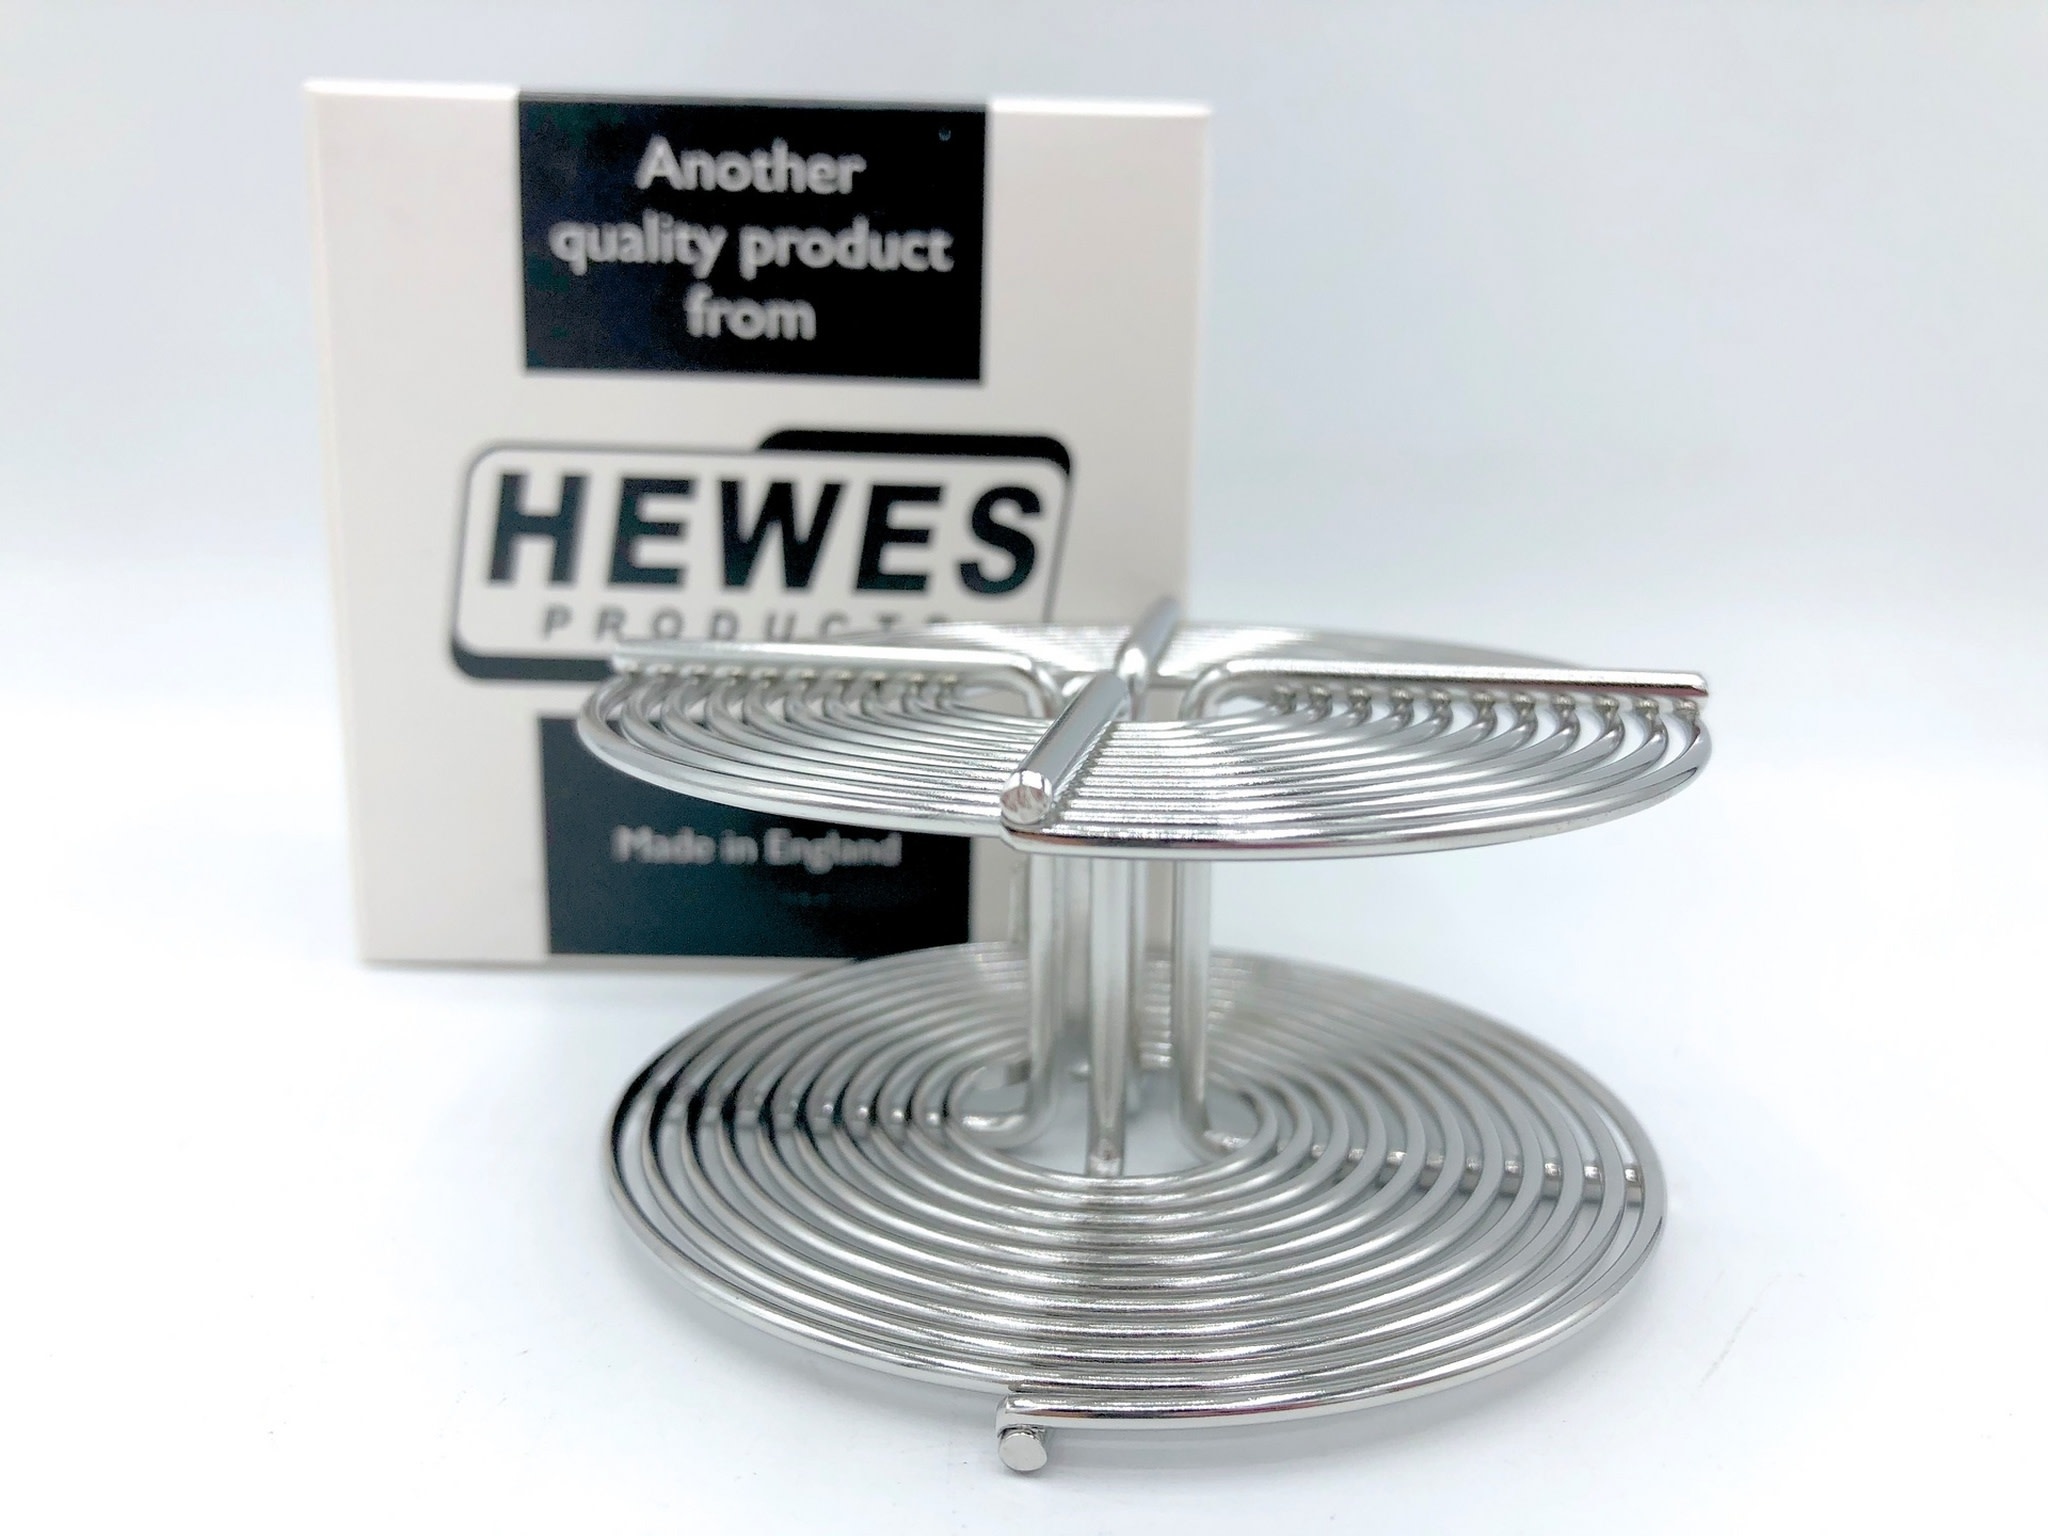 Stainless Steel Film Developing Tank + (2) Hewes Pro Stainless Steel 35mm  Film Reel for Sale in San Diego, CA - OfferUp